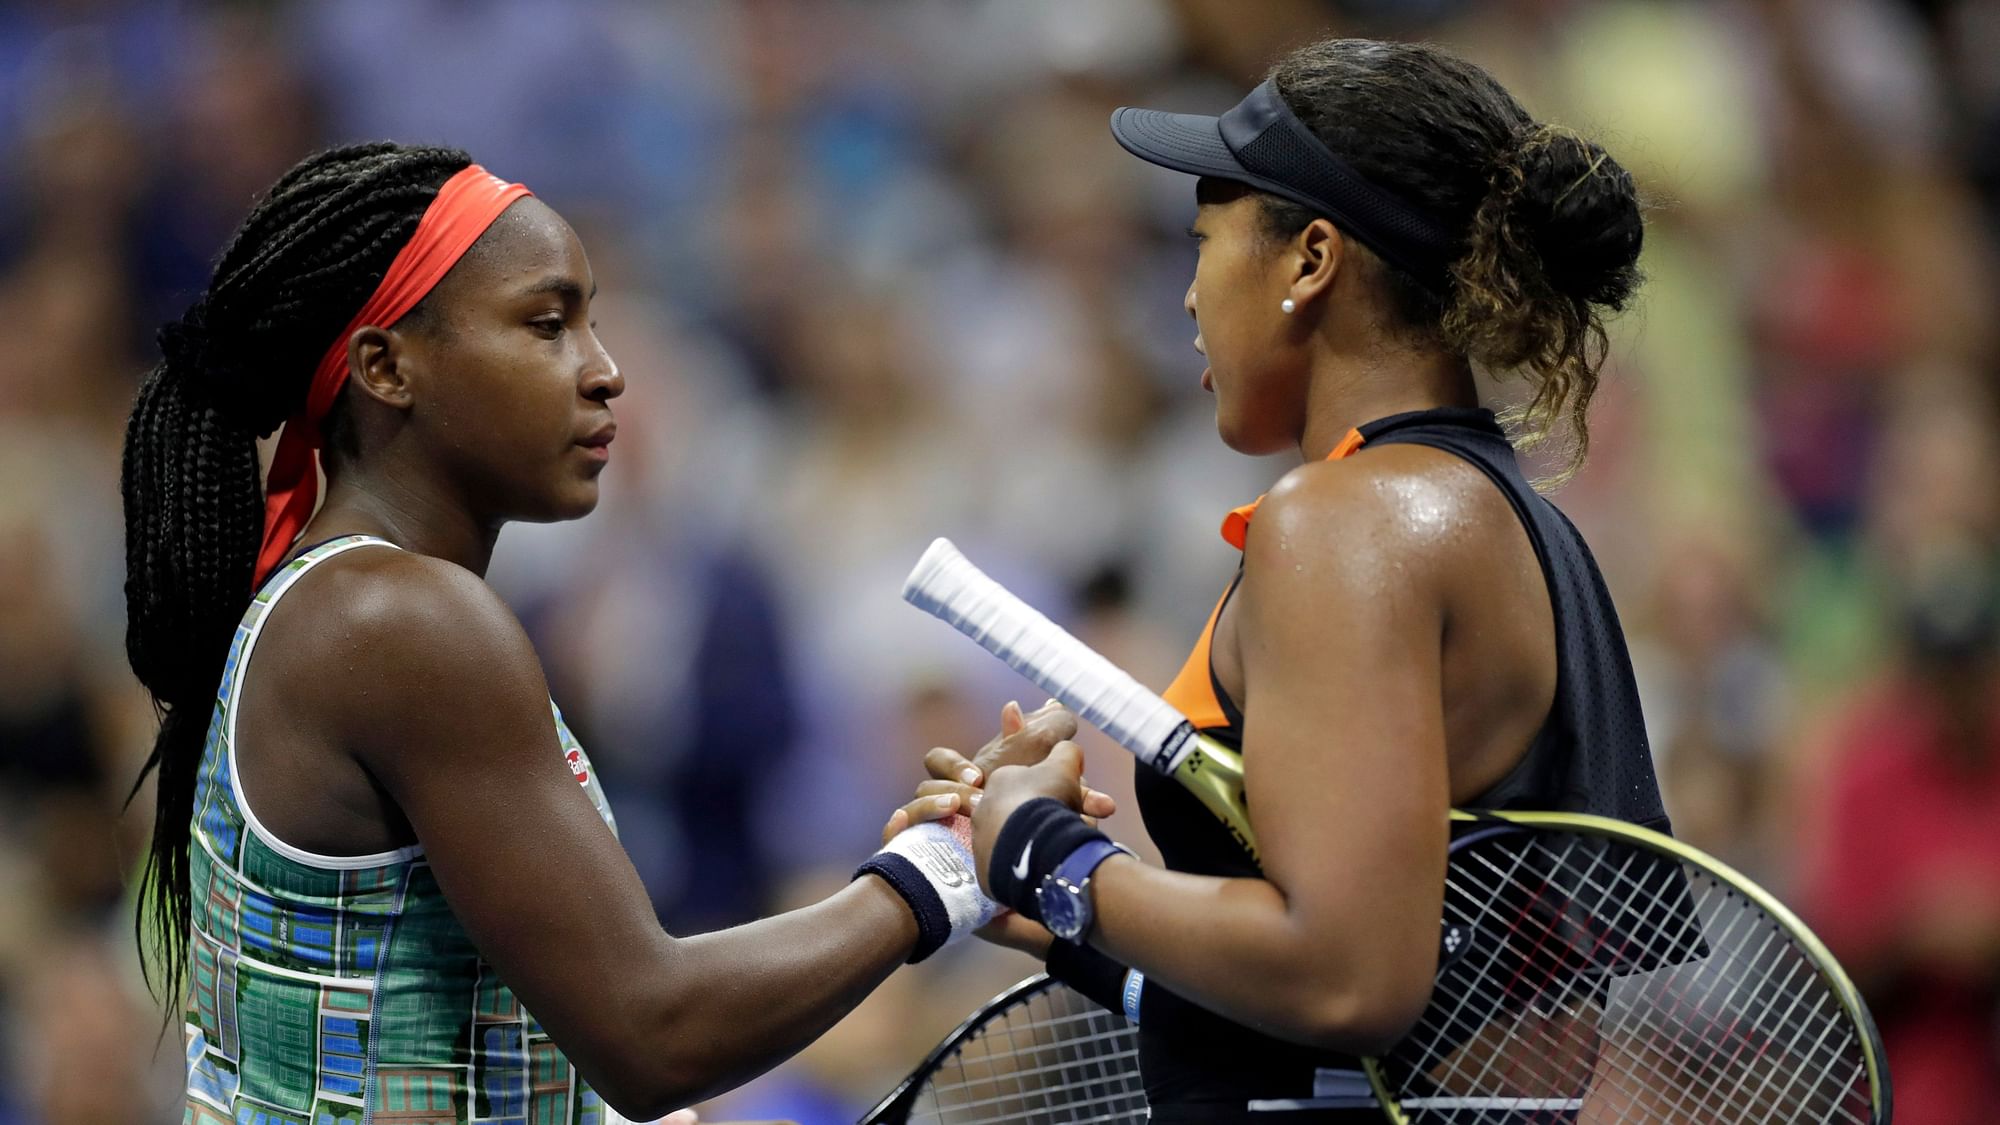 Coco Gauff’s US Open run came to an end against defending champion and No. 1 seed Naomi Osaka.